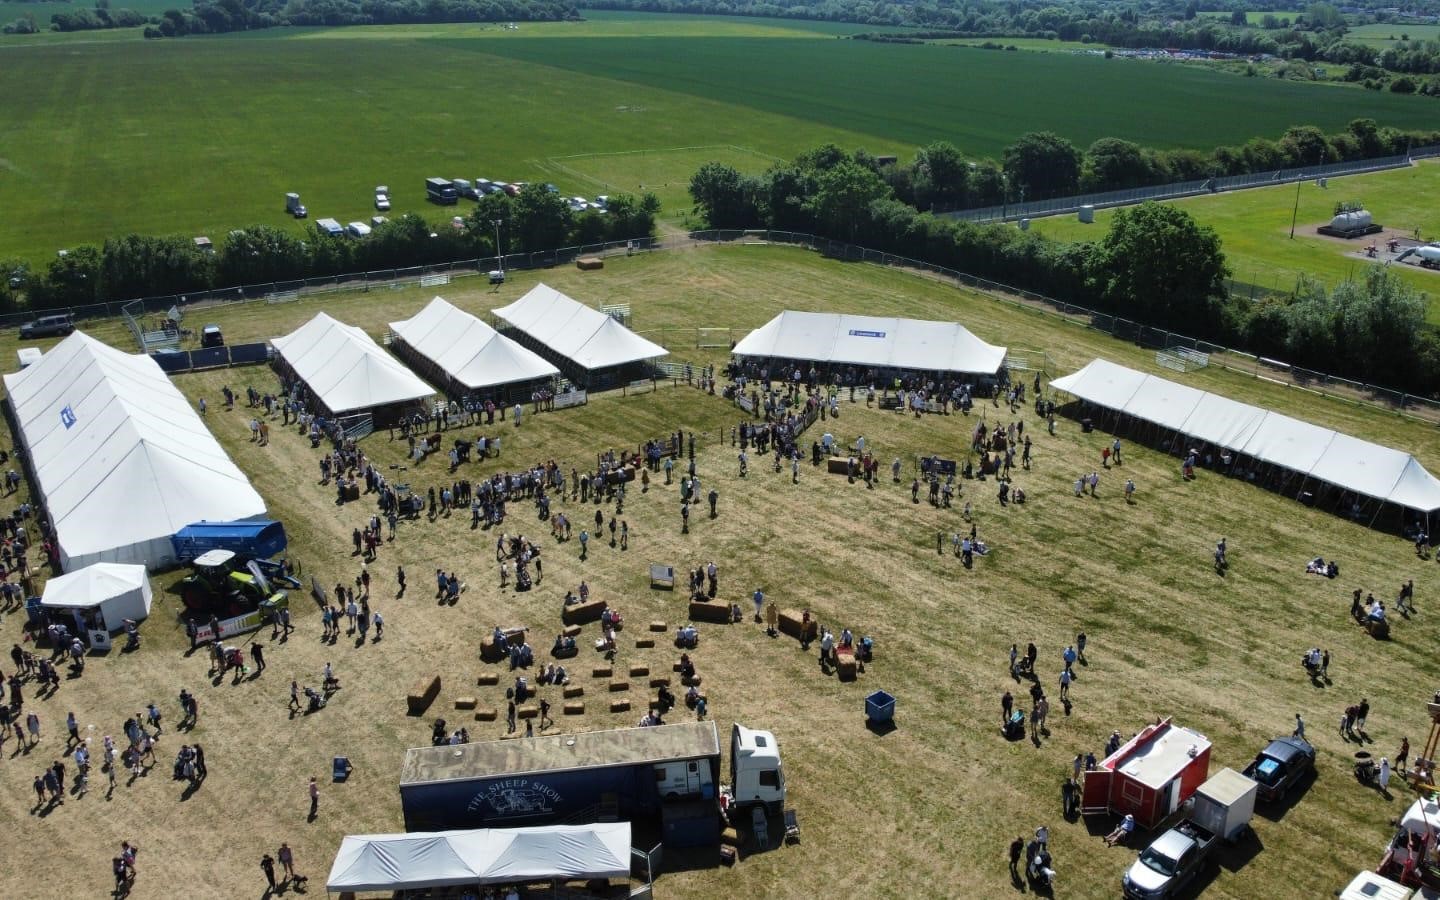 Small and large marquees